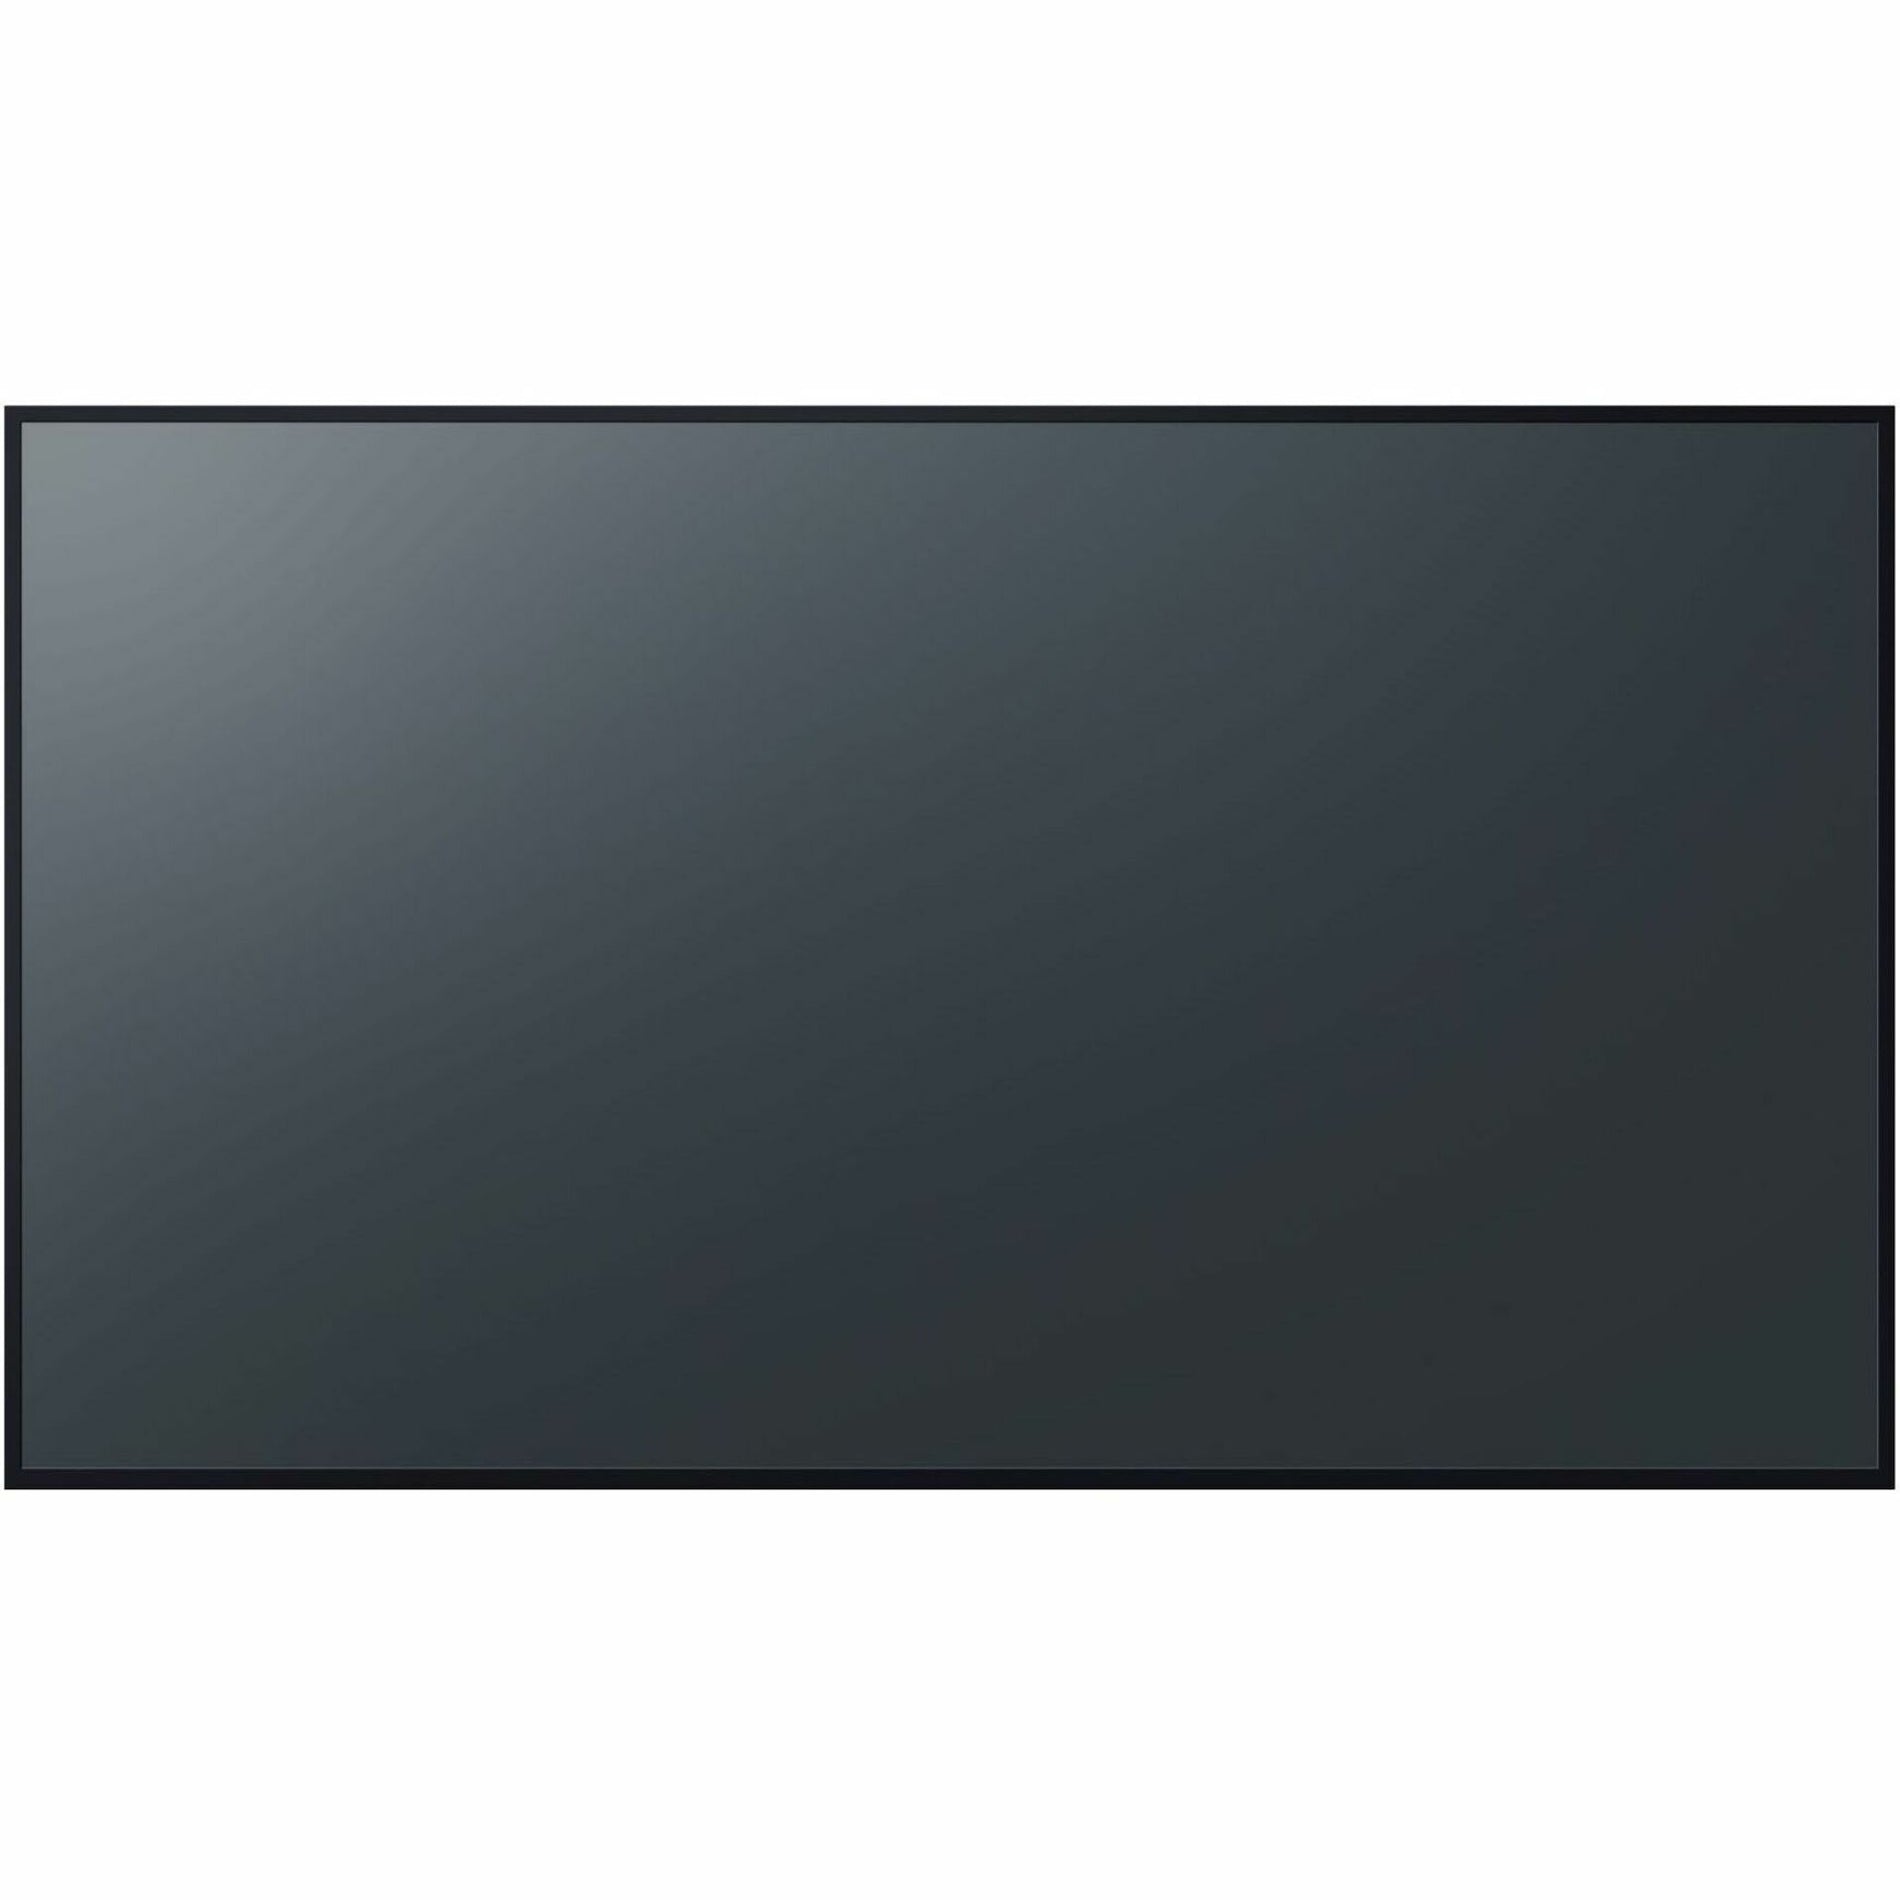 Panasonic TH-65CQE2U 65-inch Class 4K UHD Entry-Level Display, Bright and Vibrant Visuals for Corporate, Education, and Sports Bar Applications